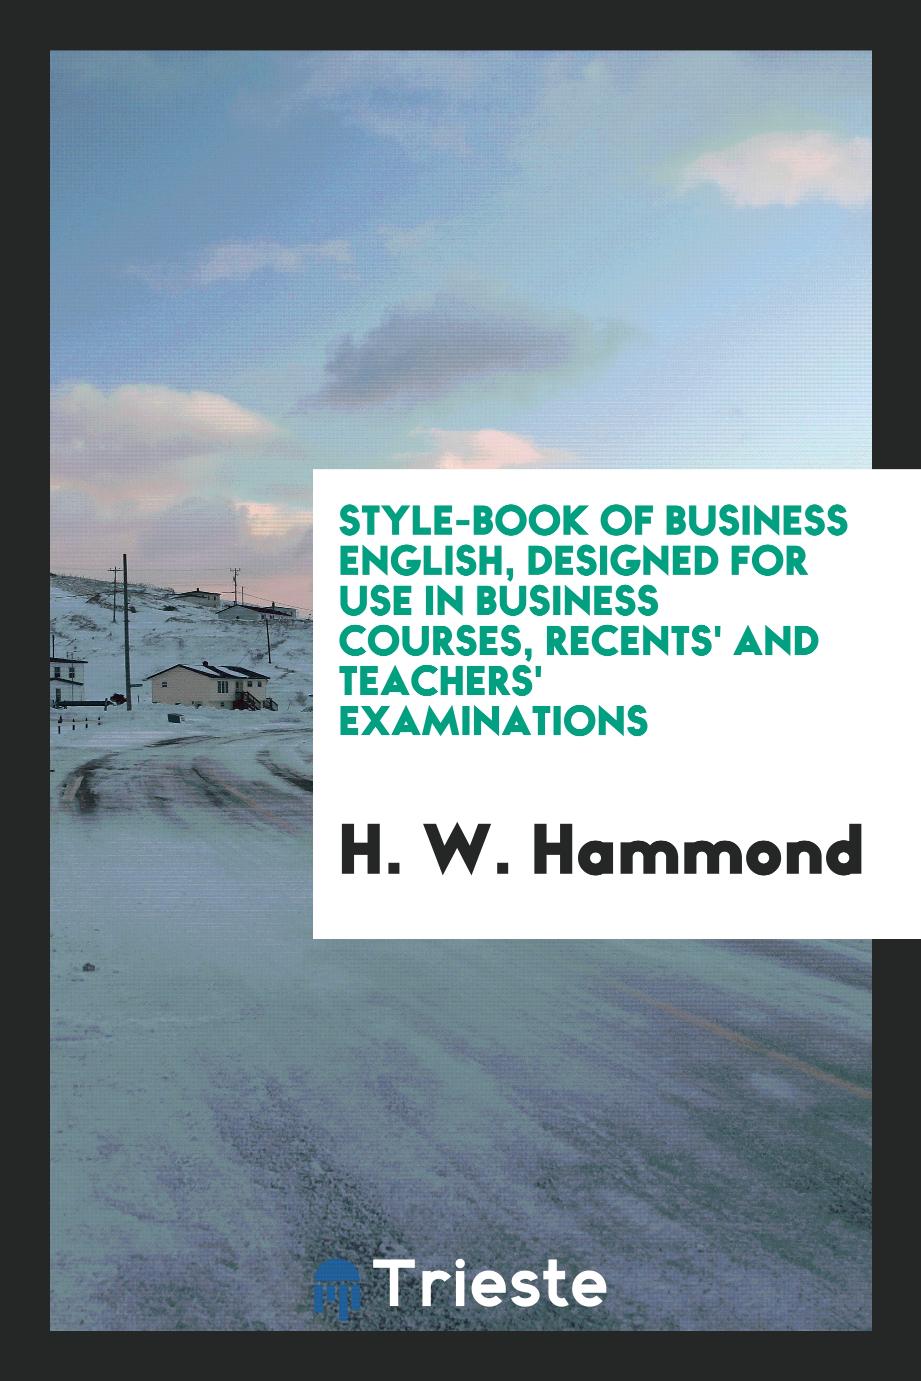 Style-Book of Business English, Designed for Use in Business Courses, Recents' and Teachers' Examinations